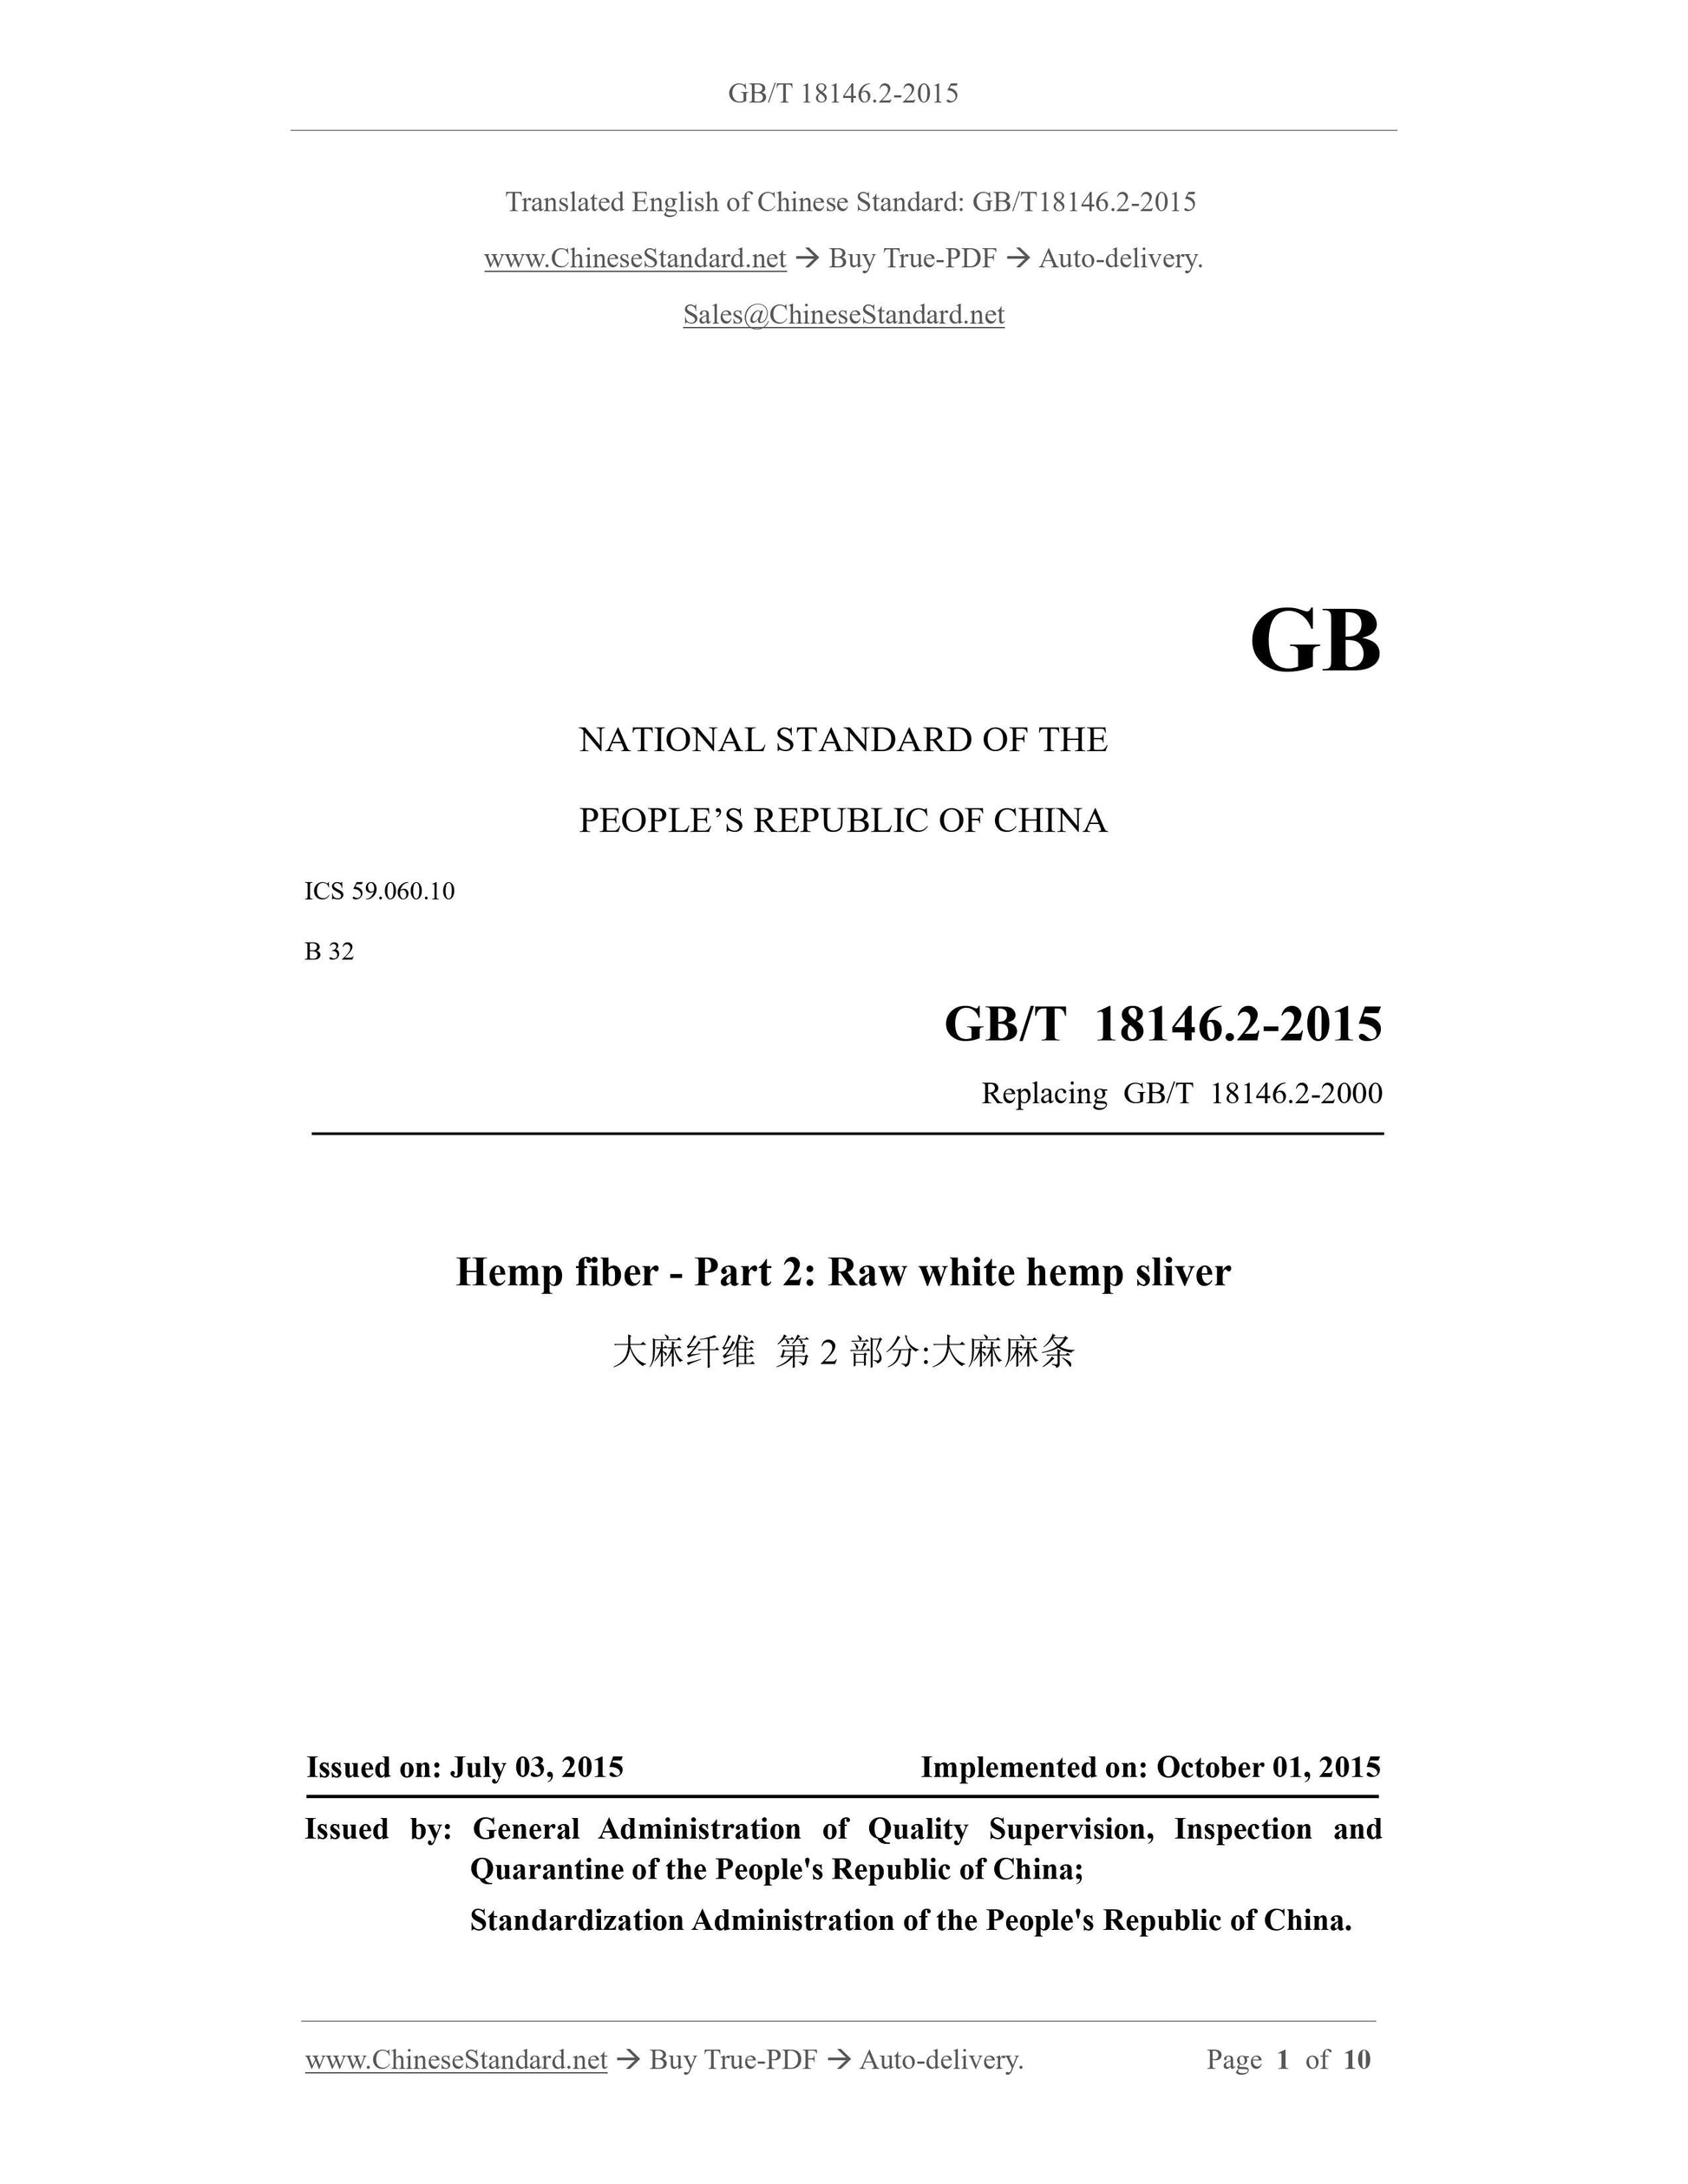 GB/T 18146.2-2015 Page 1